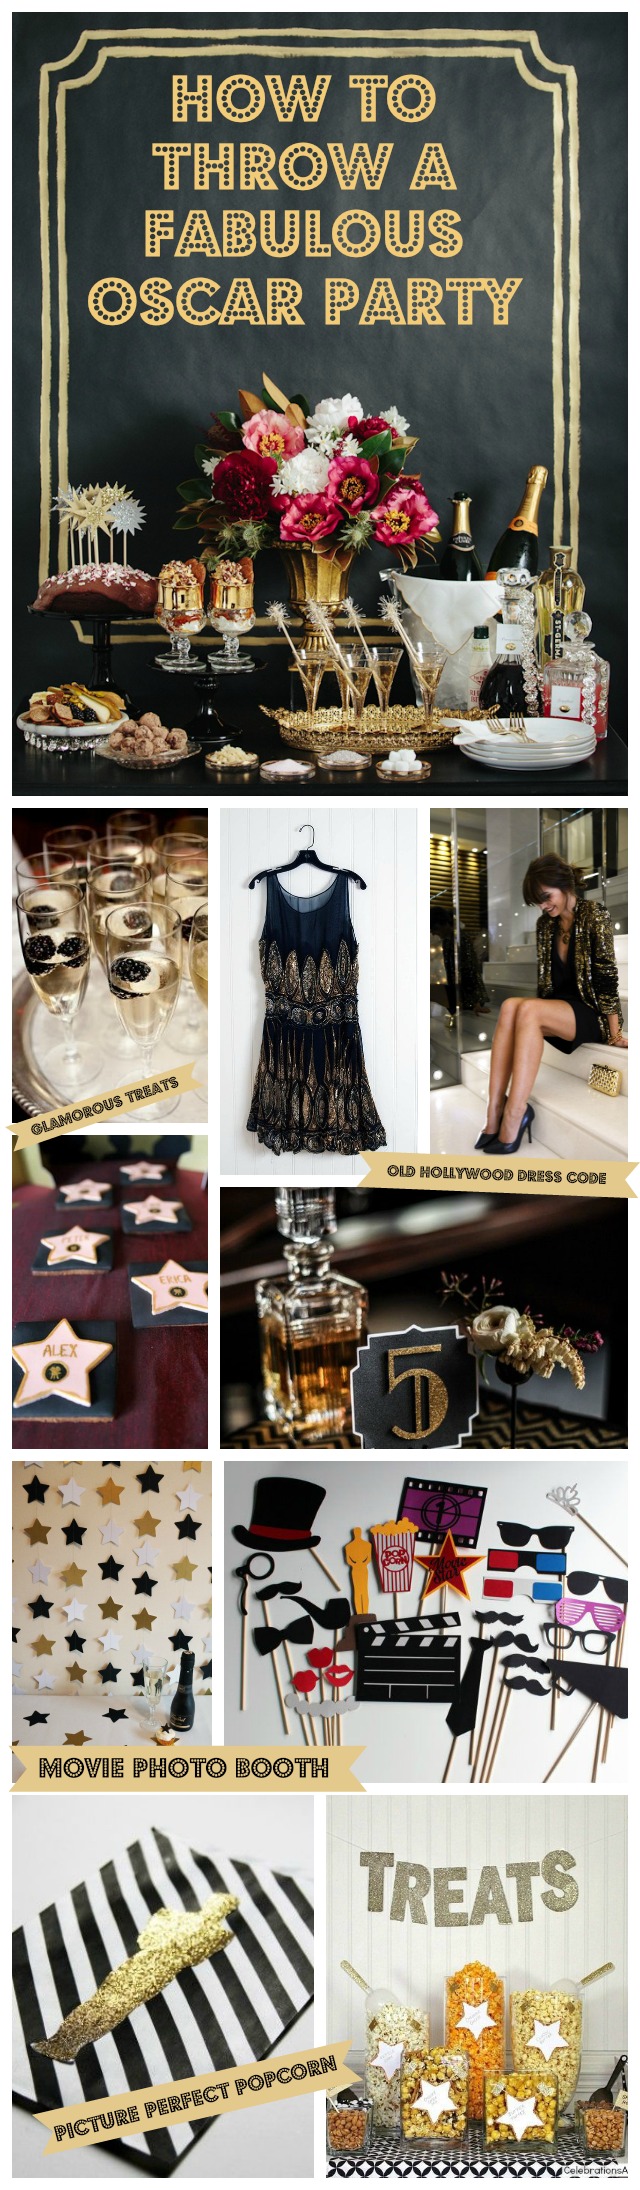 Black and Gold Party Ideas * Academy Awards Party Ideas 